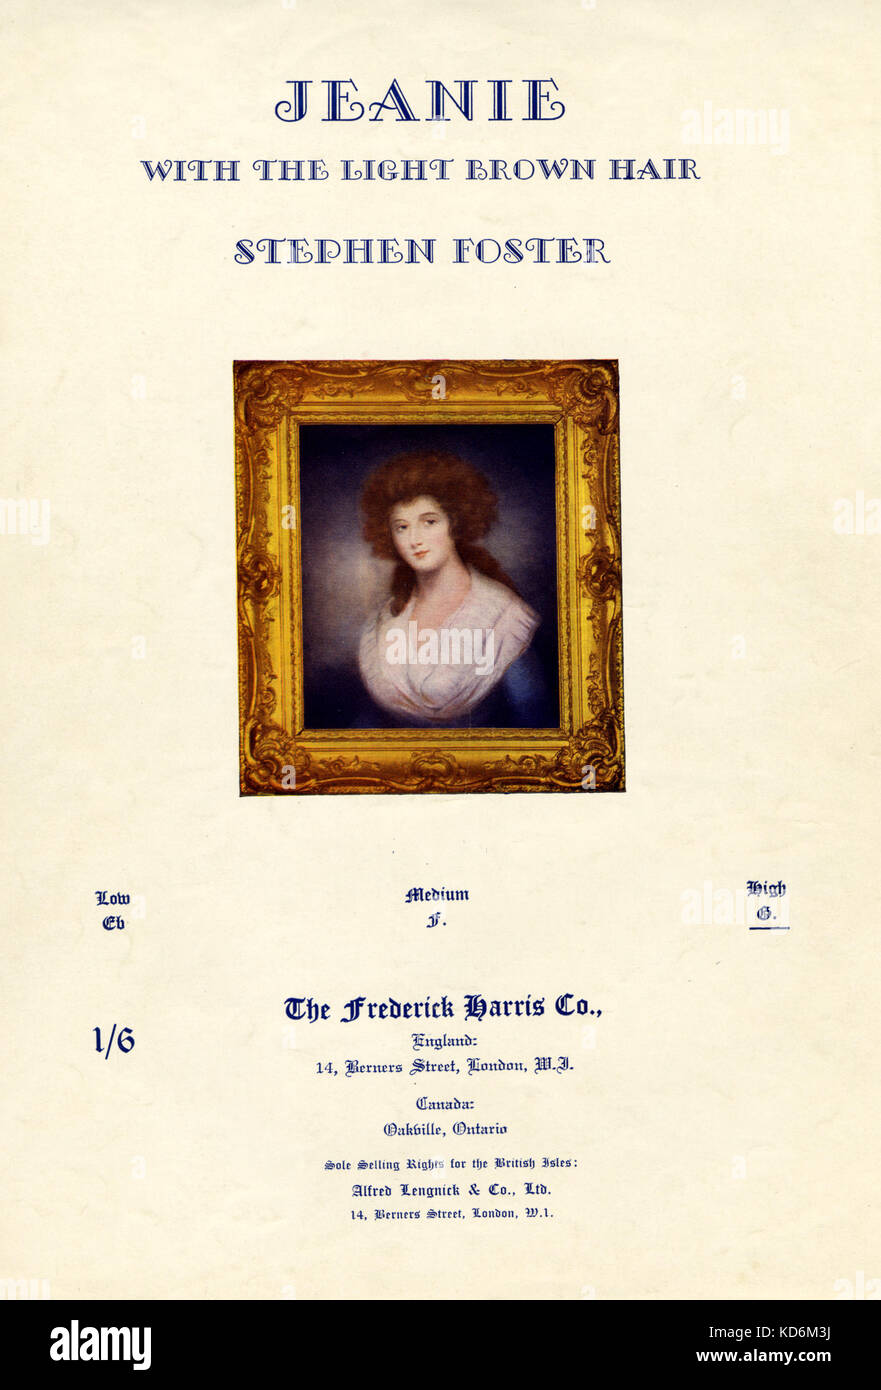 Stephen Foster song  ' Jeanie With The Light Brown Hair ' (1854) score cover (voice and piano). Framed portrait of 19th century woman.  American composer, 1826-1864. Published 1940 The Frederick Harris Co., London. Stock Photo